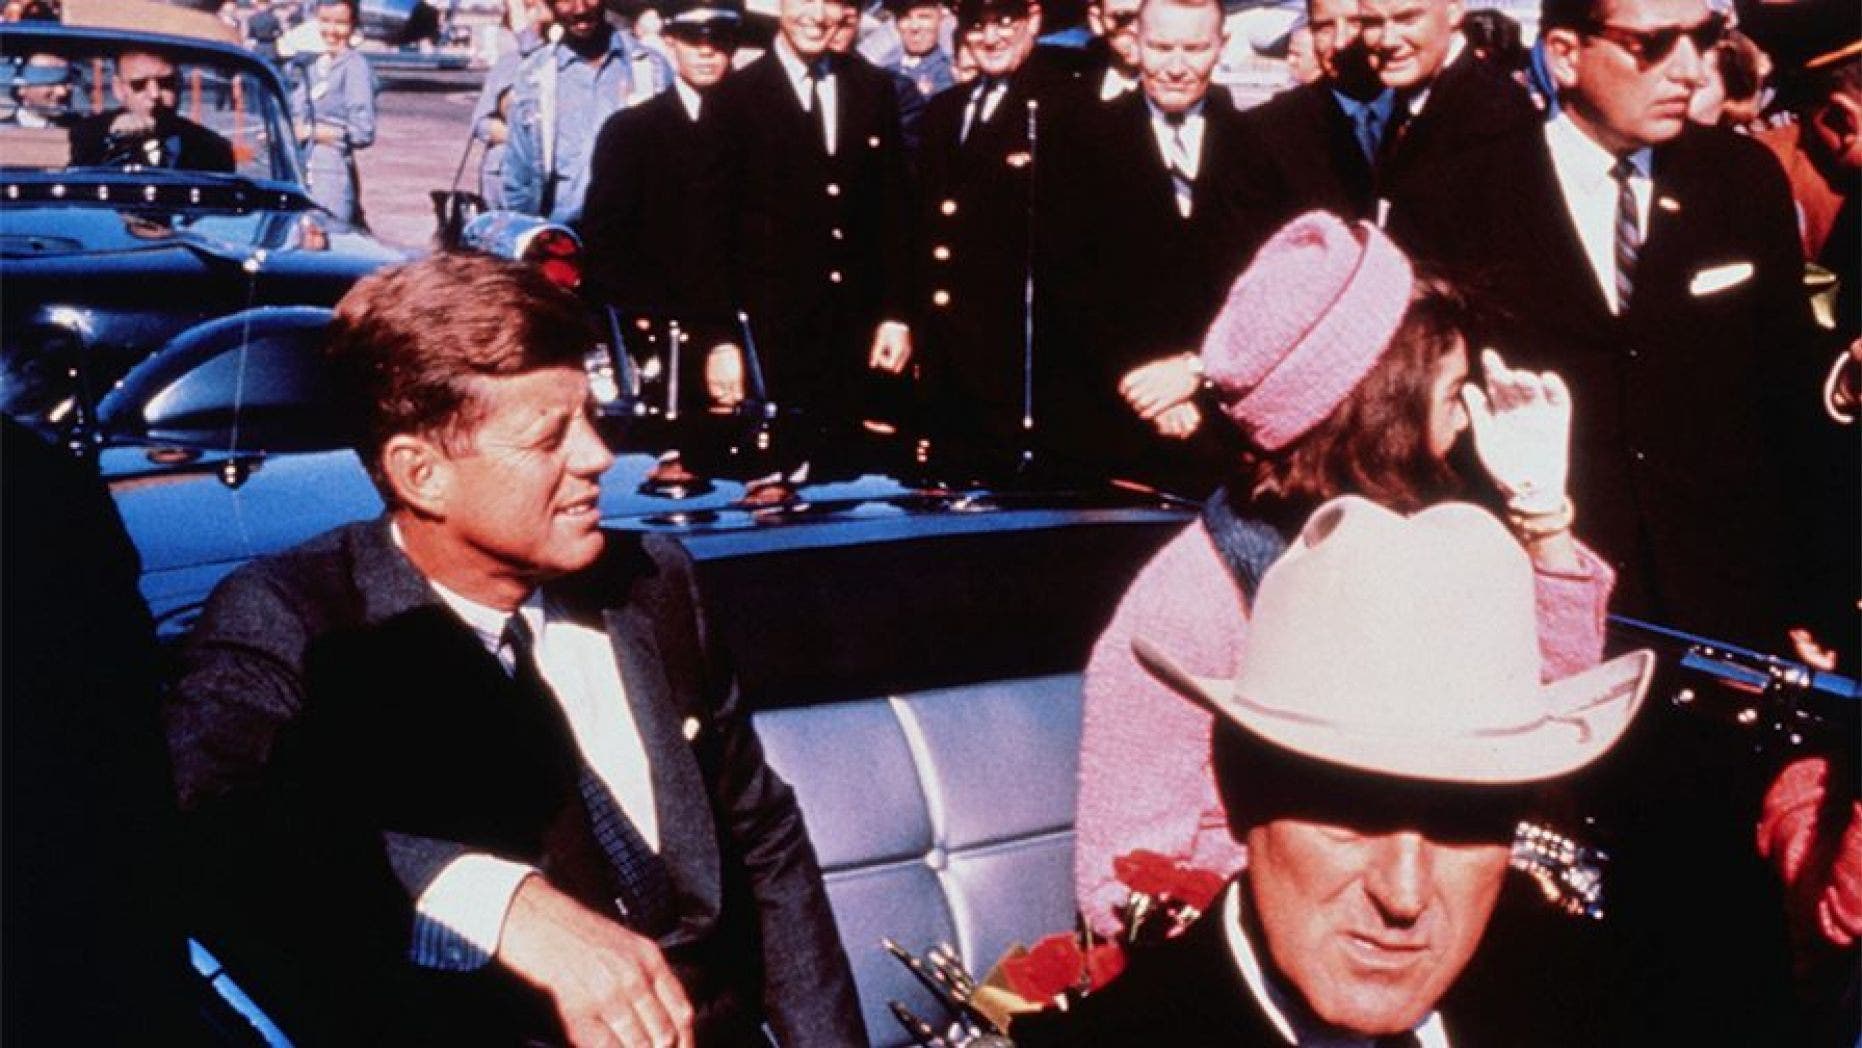 JFK told the Secret Service to keep its distance on assassination day